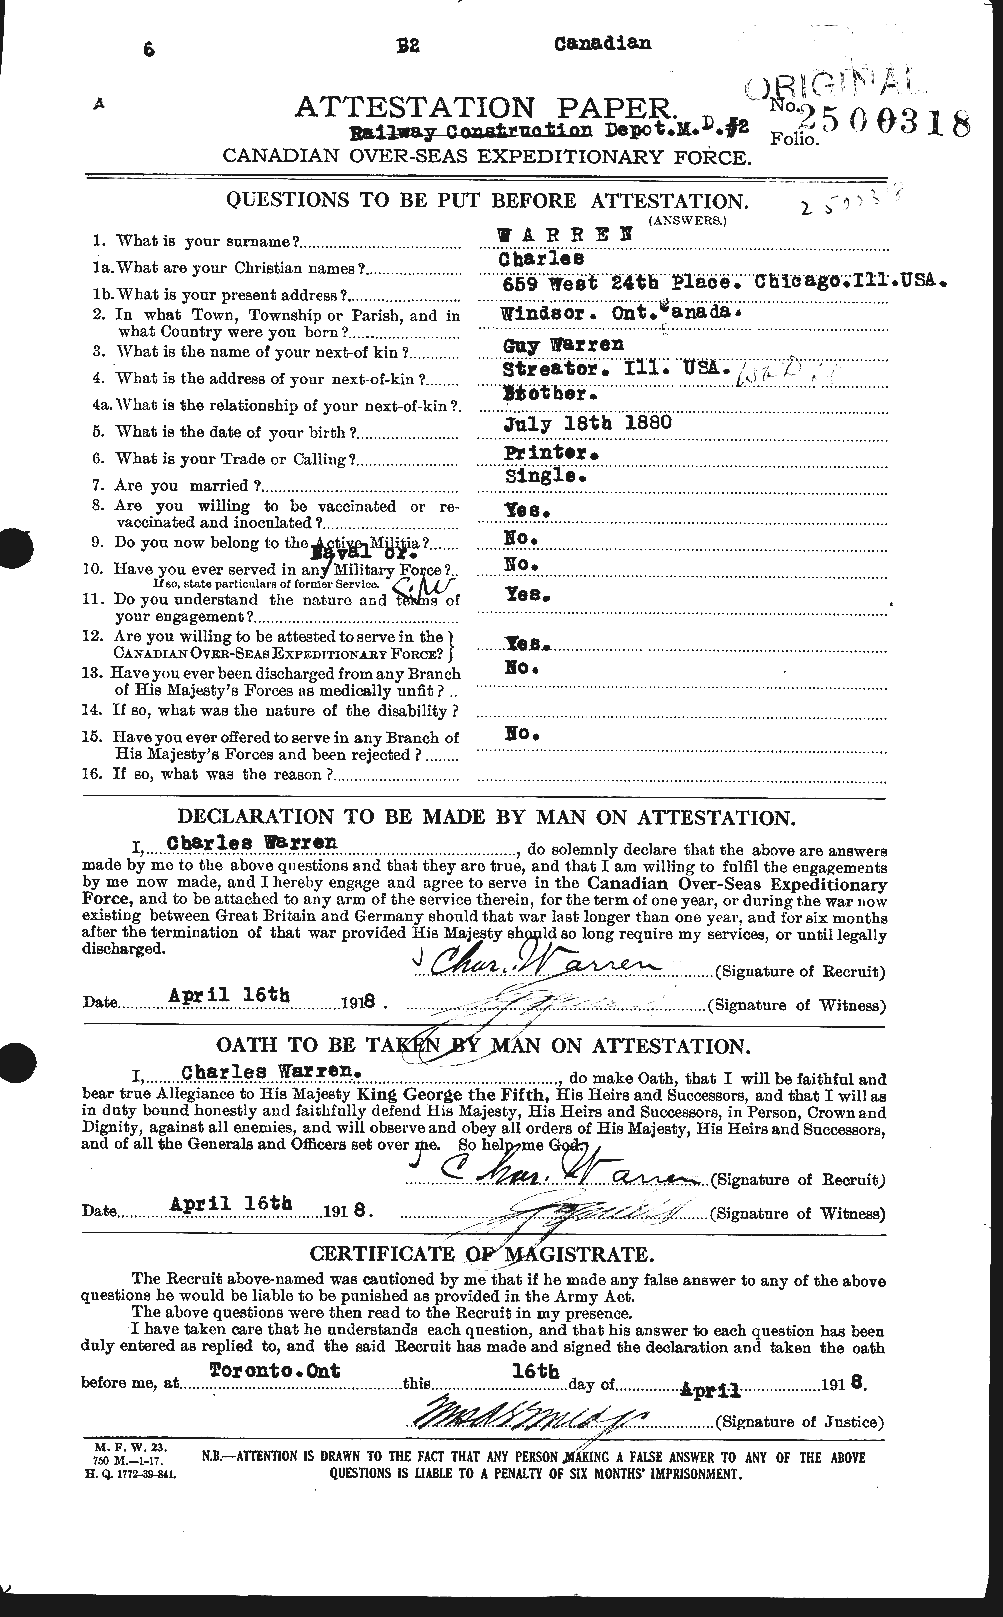 Personnel Records of the First World War - CEF 658382a